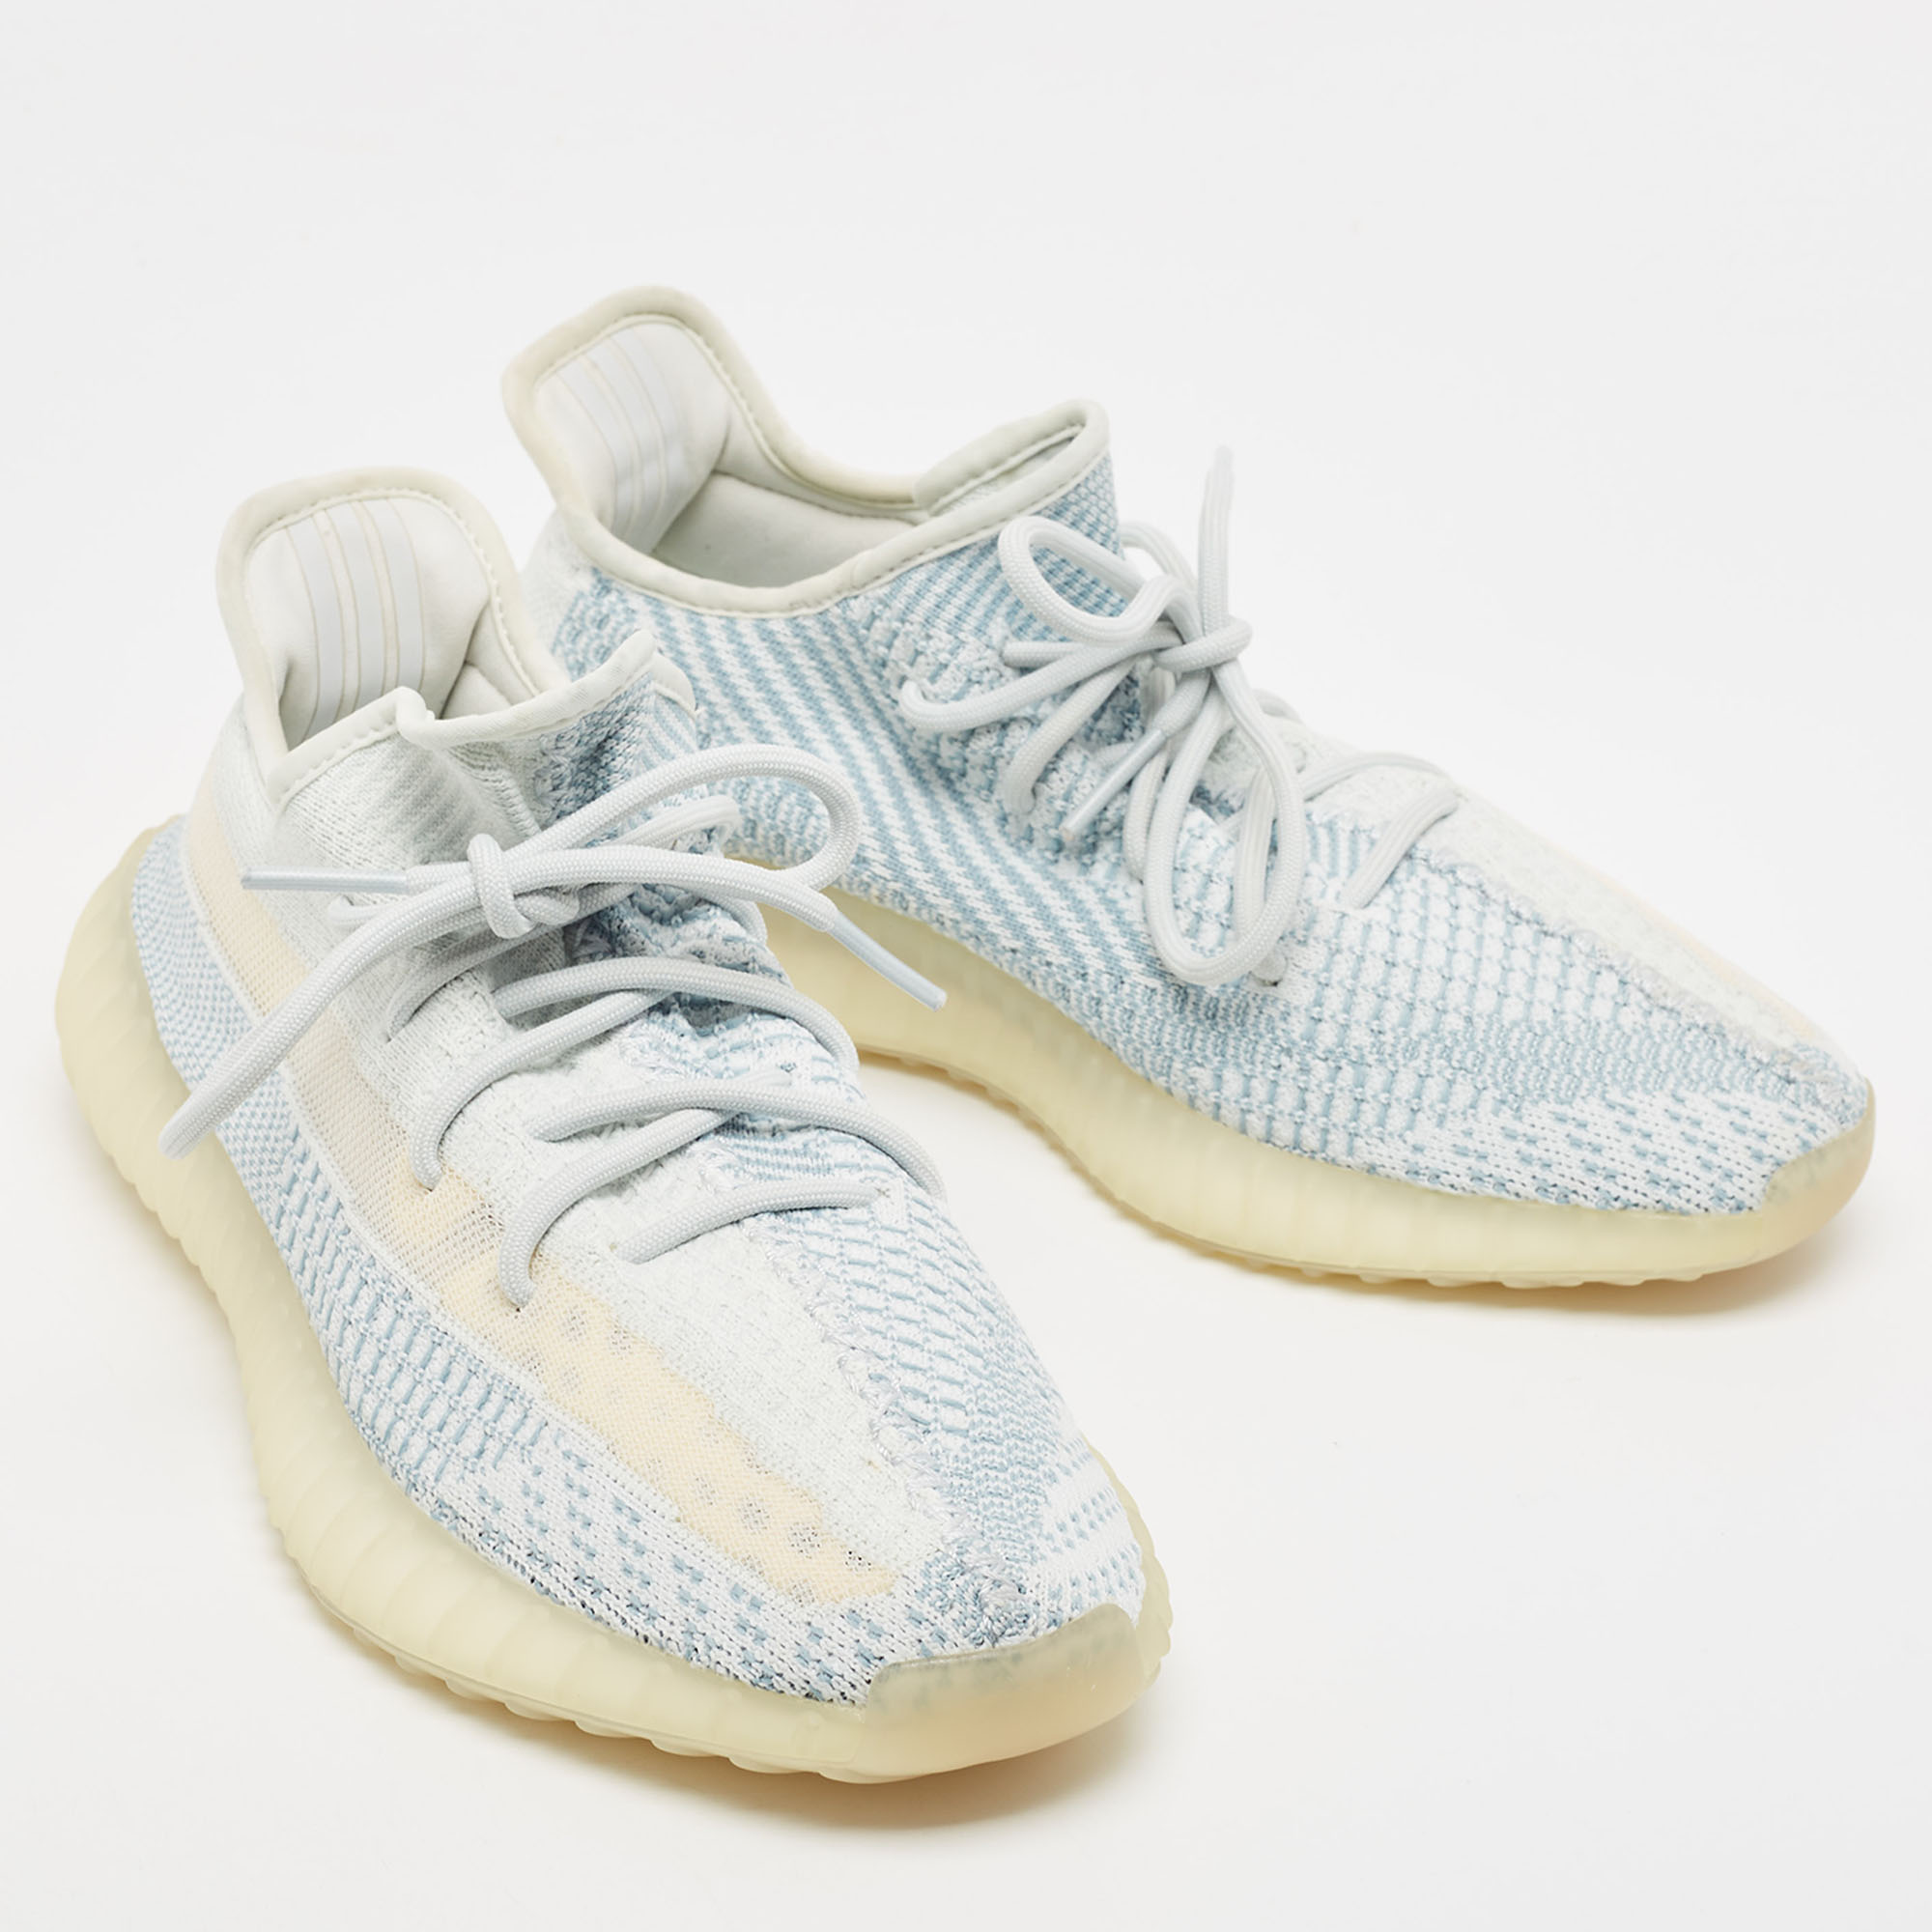 Yeezy X Adidas Light Blue Cotton Knit Boost 350 V2 Sneakers Size 43 1/3